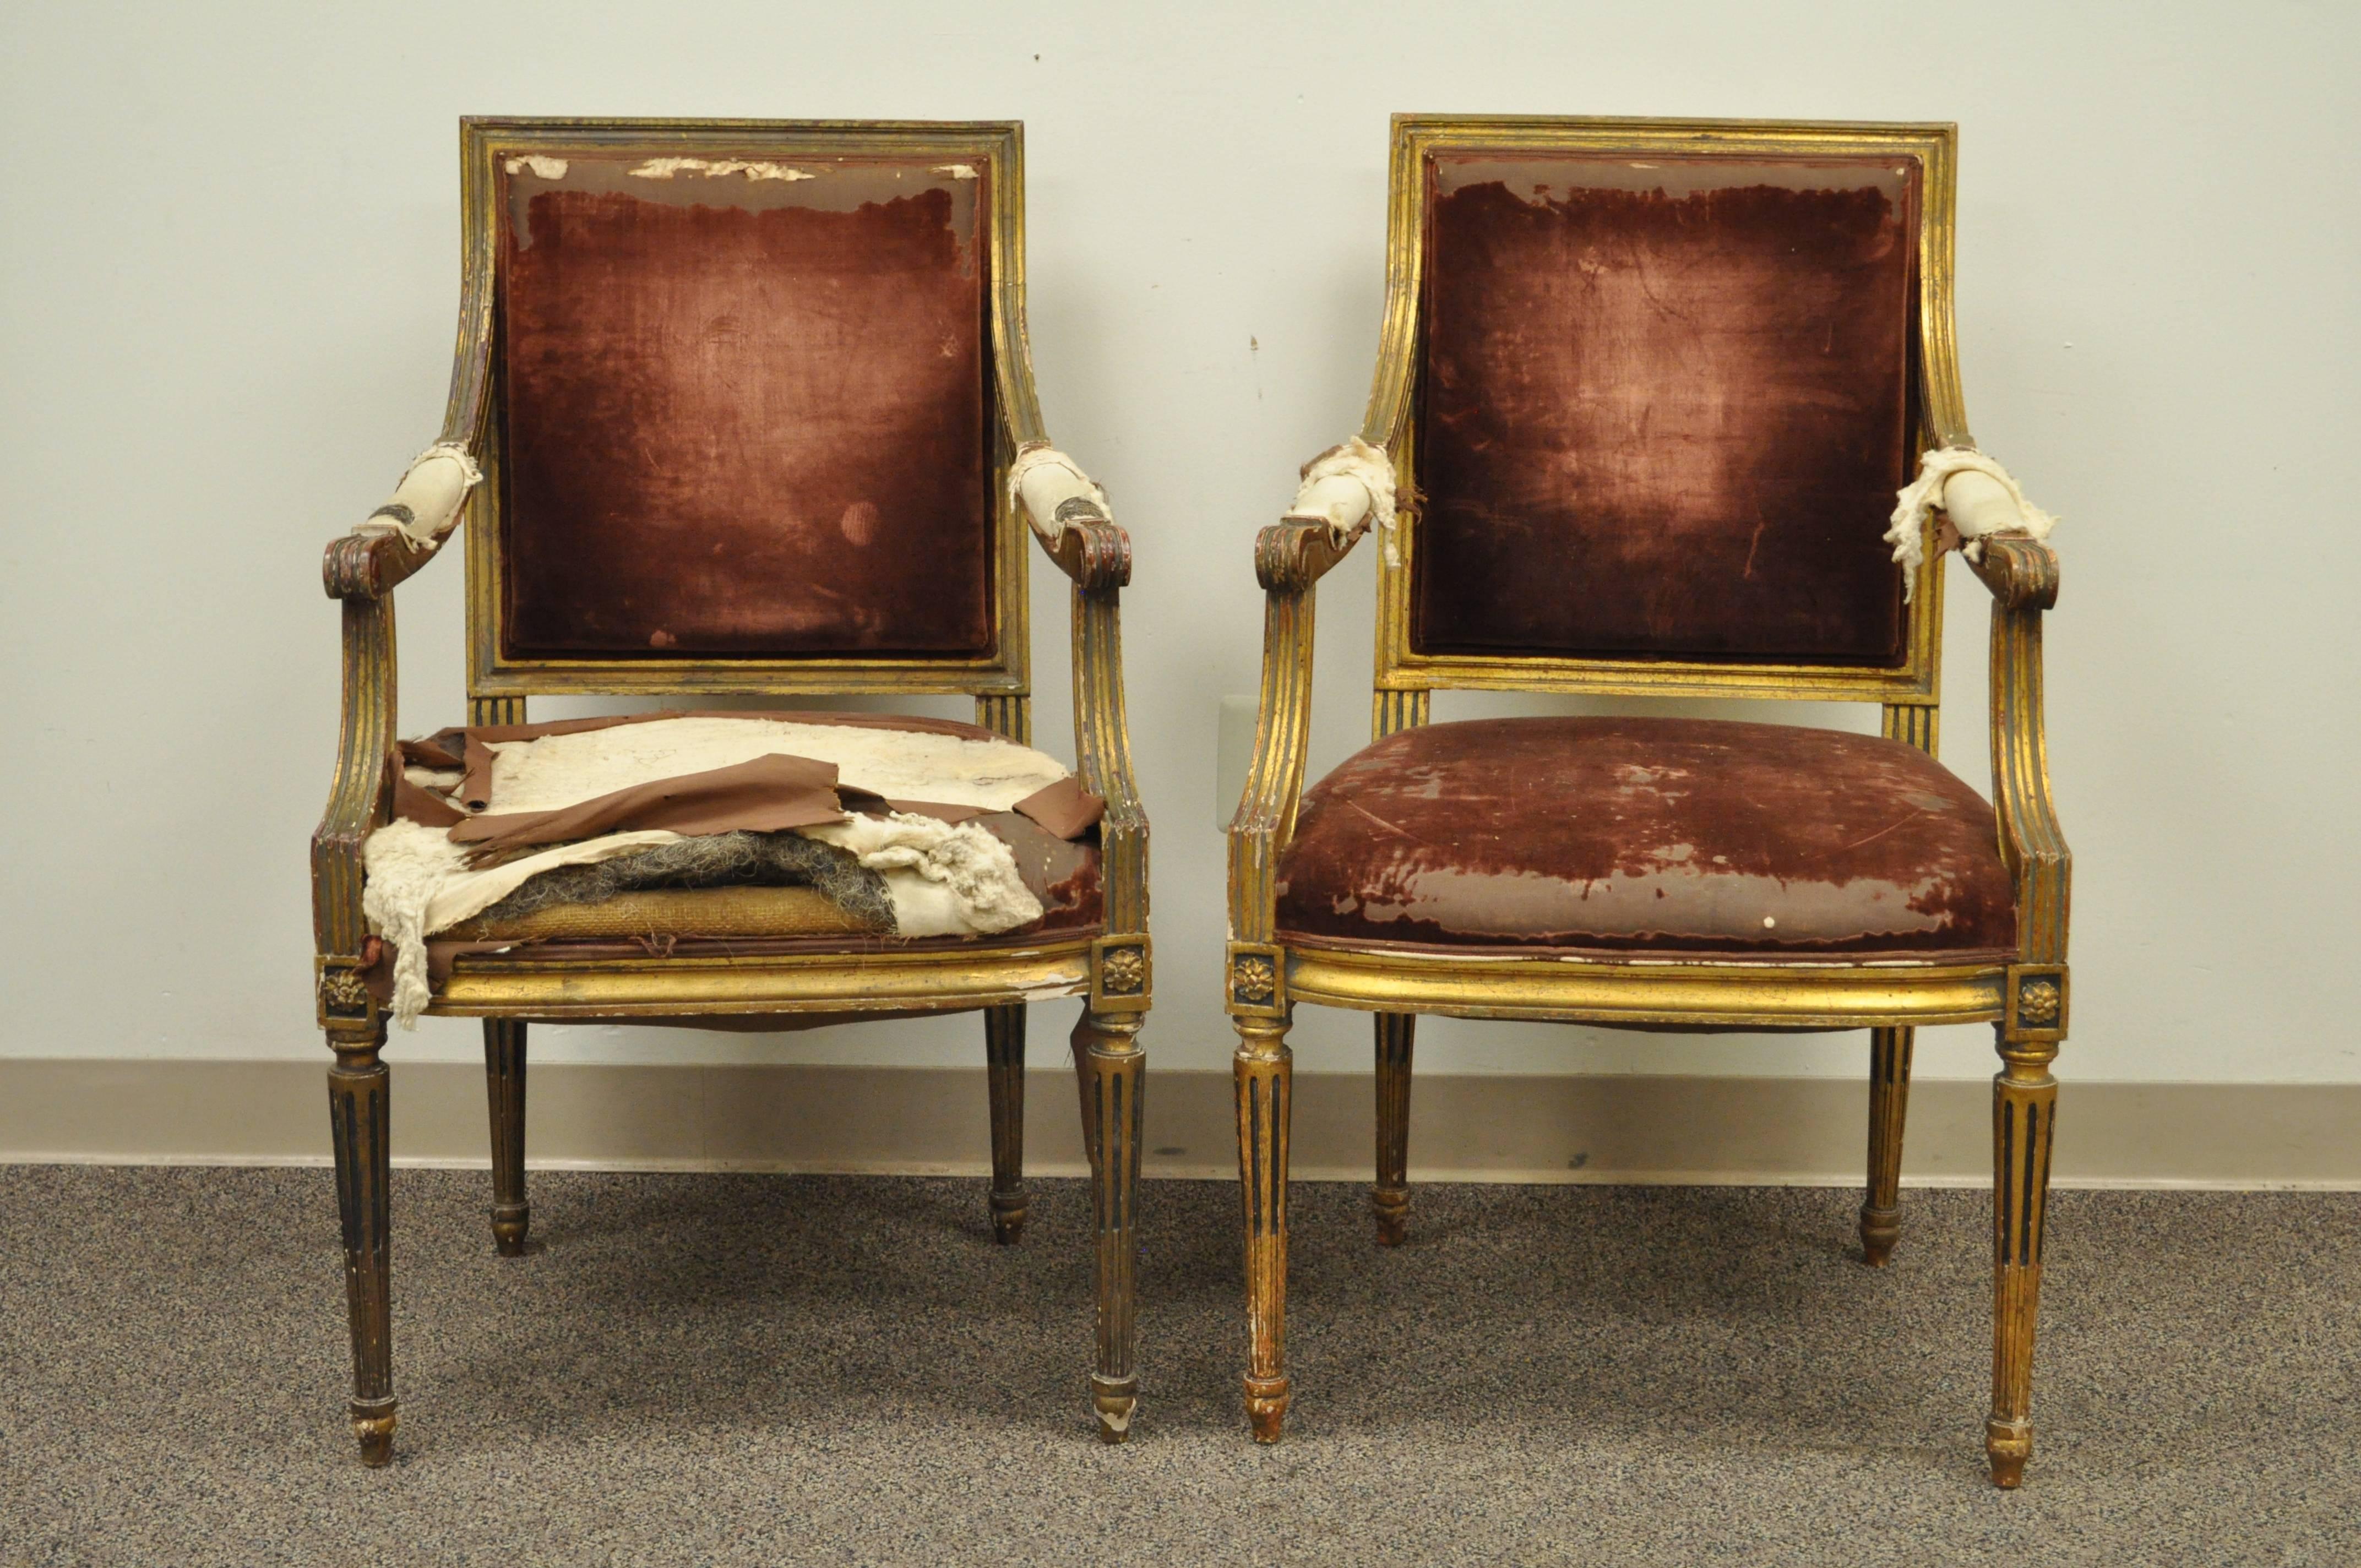 Elegant pair of French Louis XVI style giltwood armchairs. These late 19th century French chairs features reeded and tapered legs, square backs and classic Louis XVI form. Original antique condition. 27